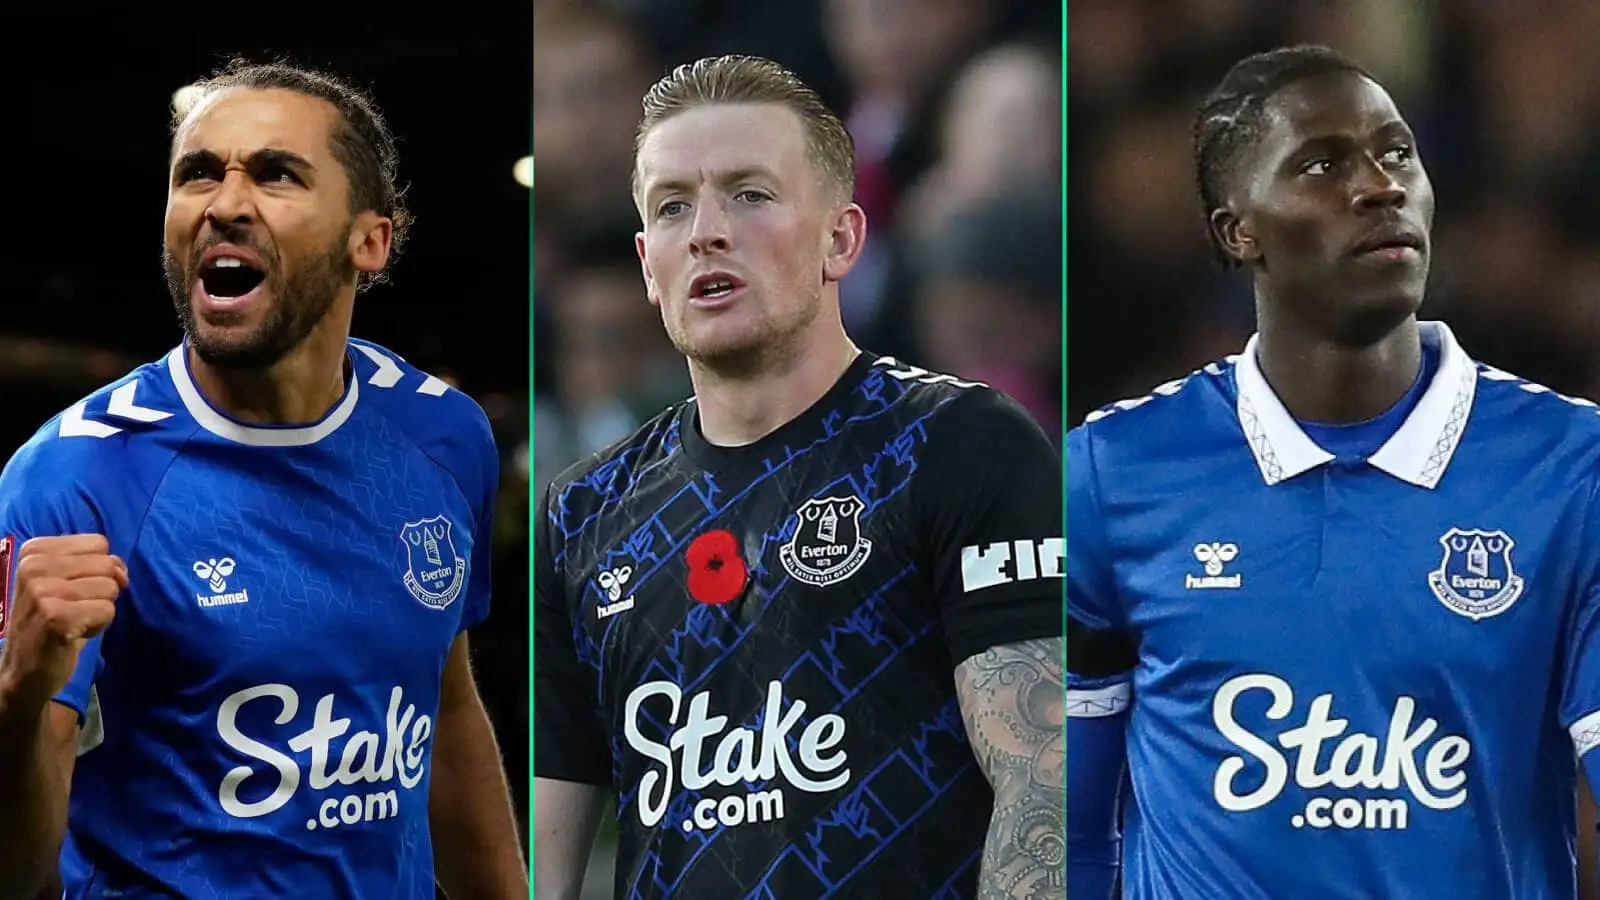 Dominic Calvert-Lewin, Jordan Pickford and Amamdou Onana are among the stars tipped to leave Everton